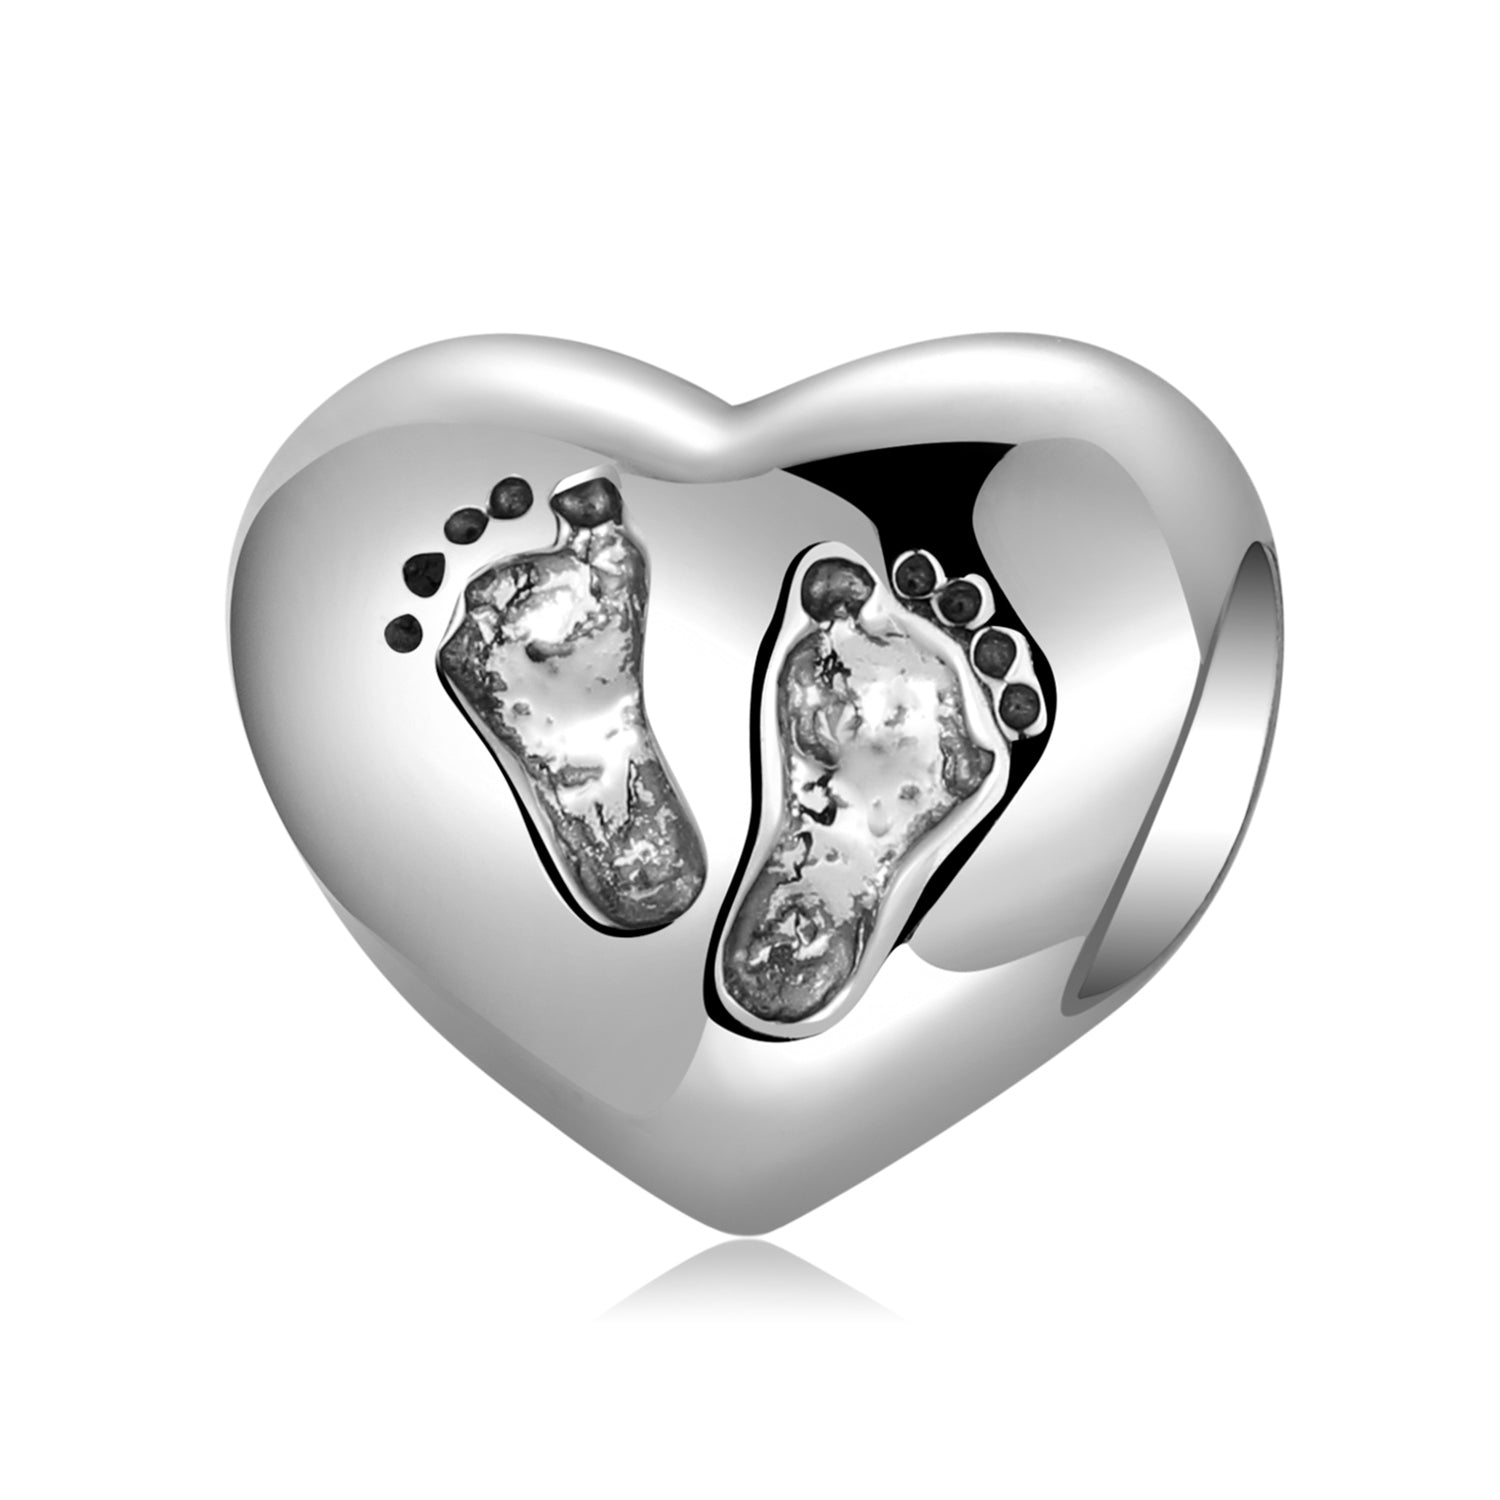 Children's feet in the shape of a heart